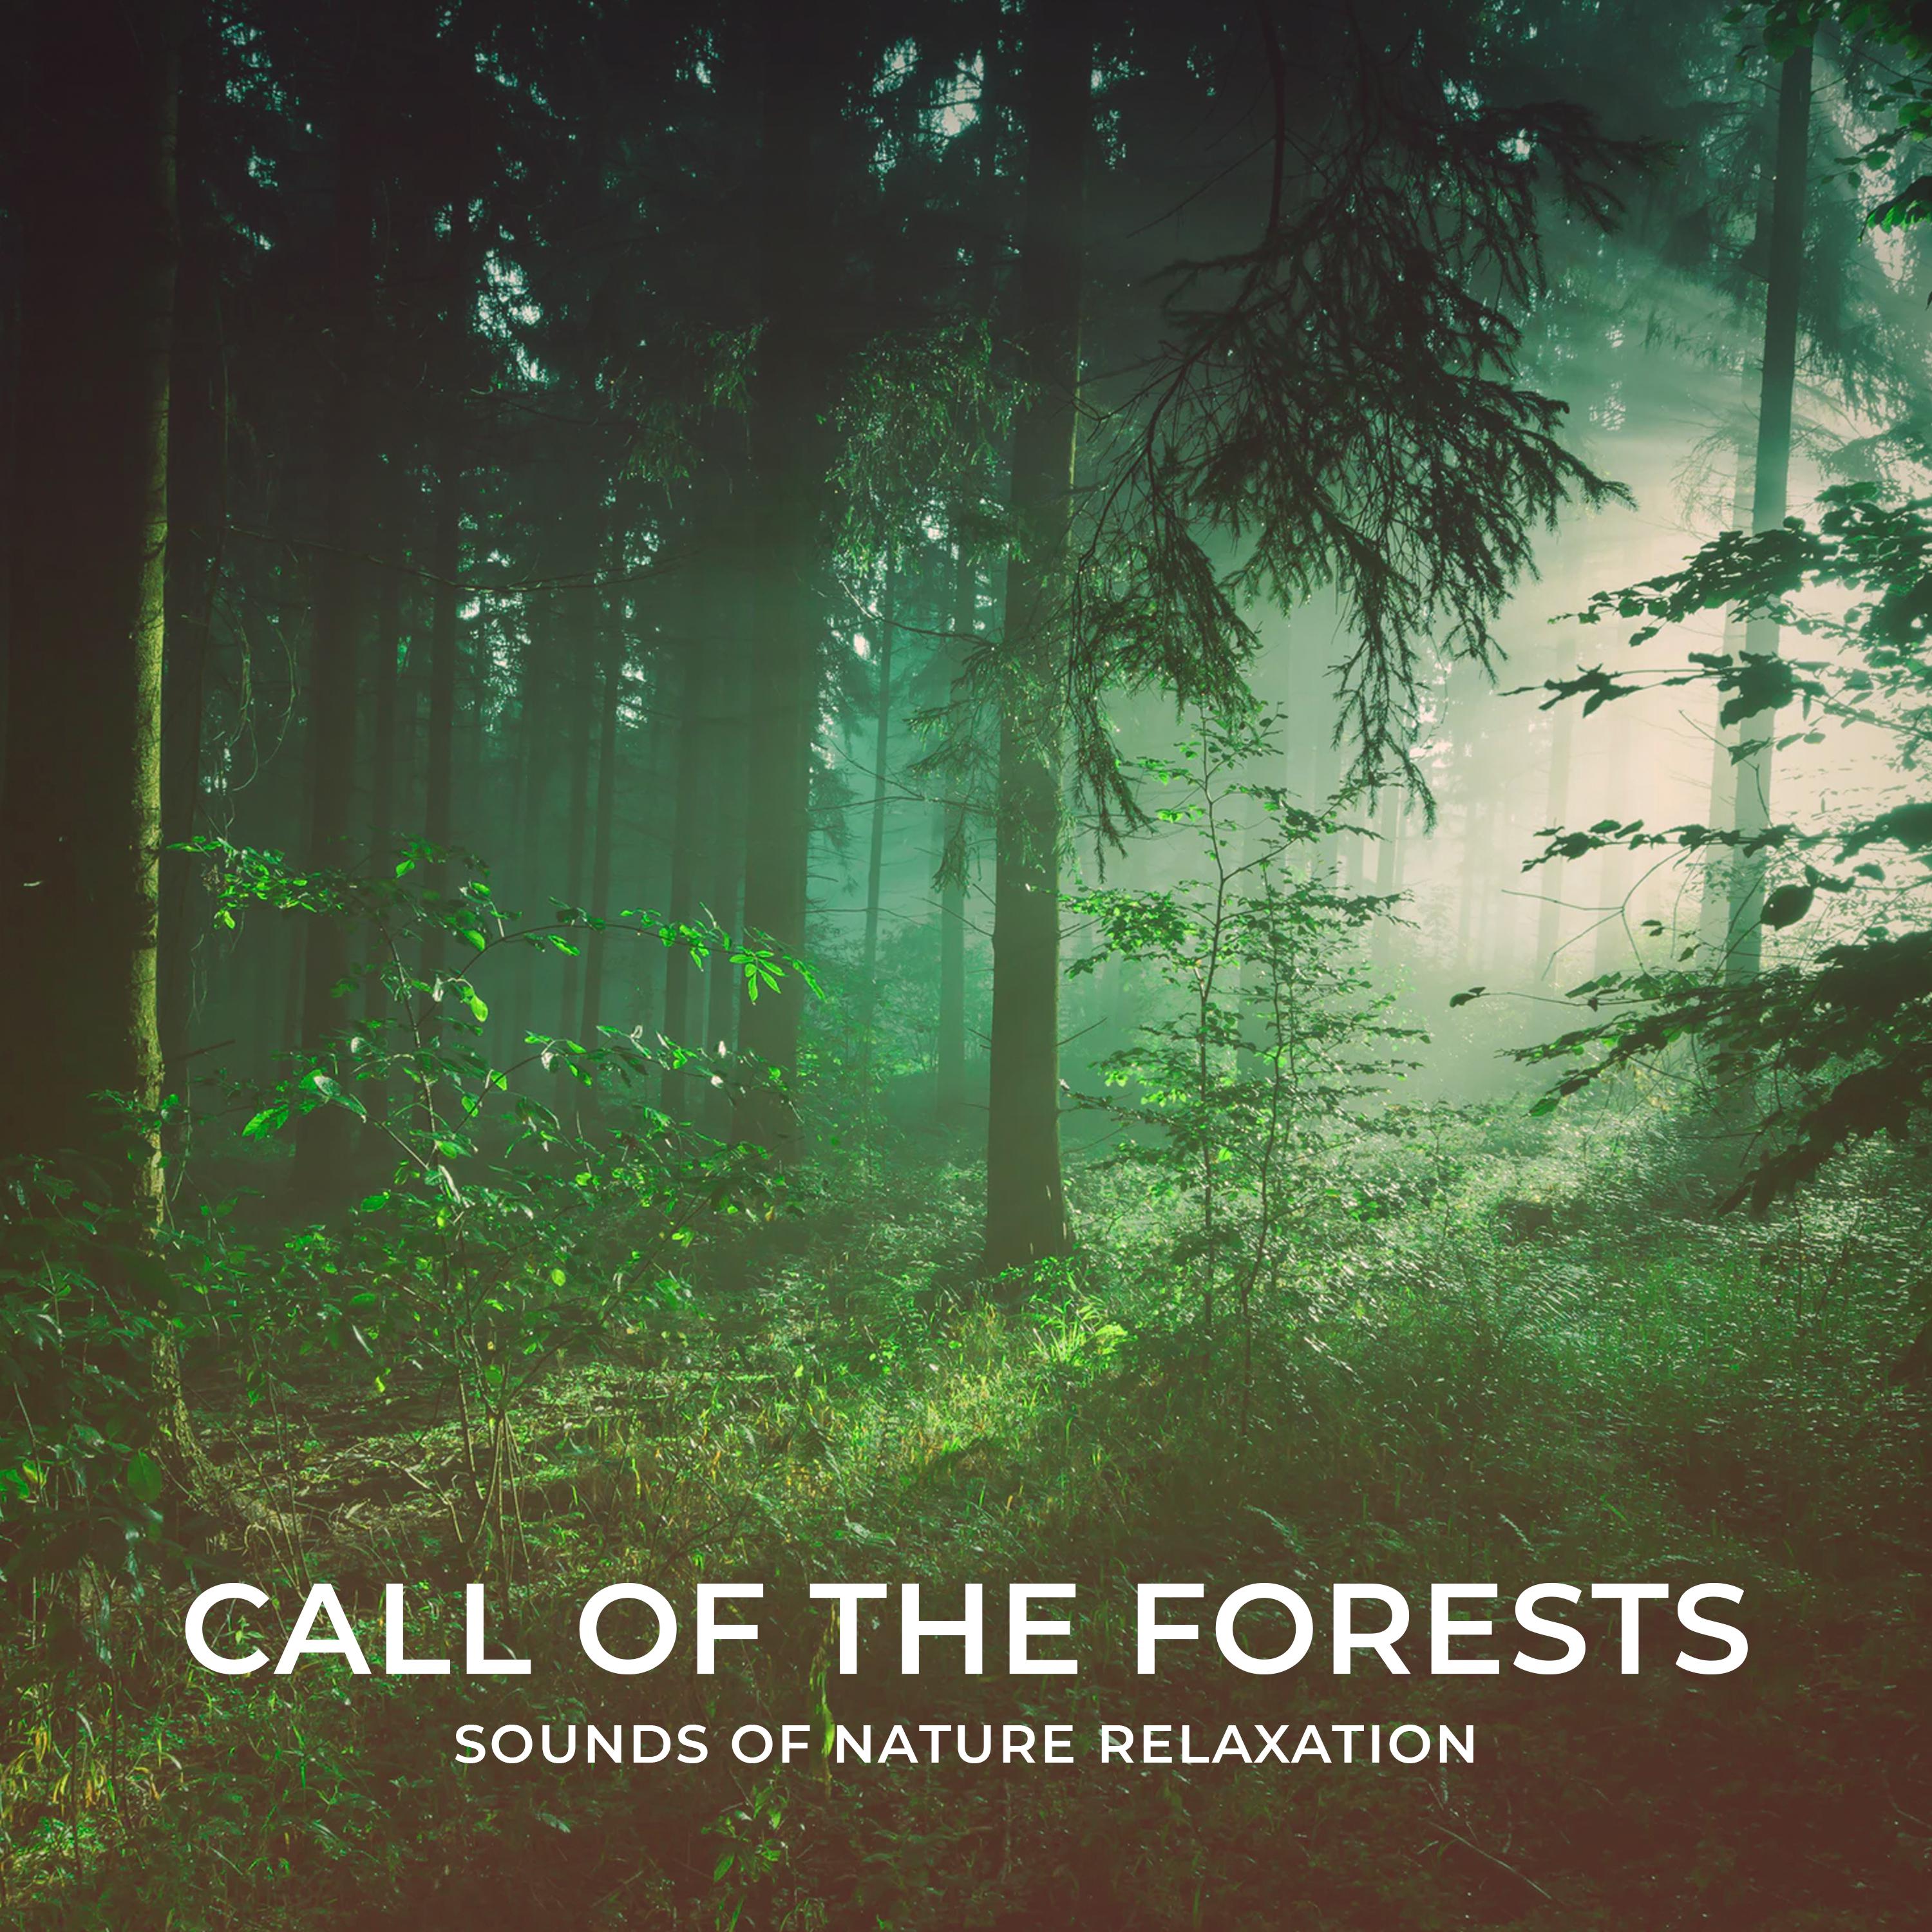 Call of the Forests